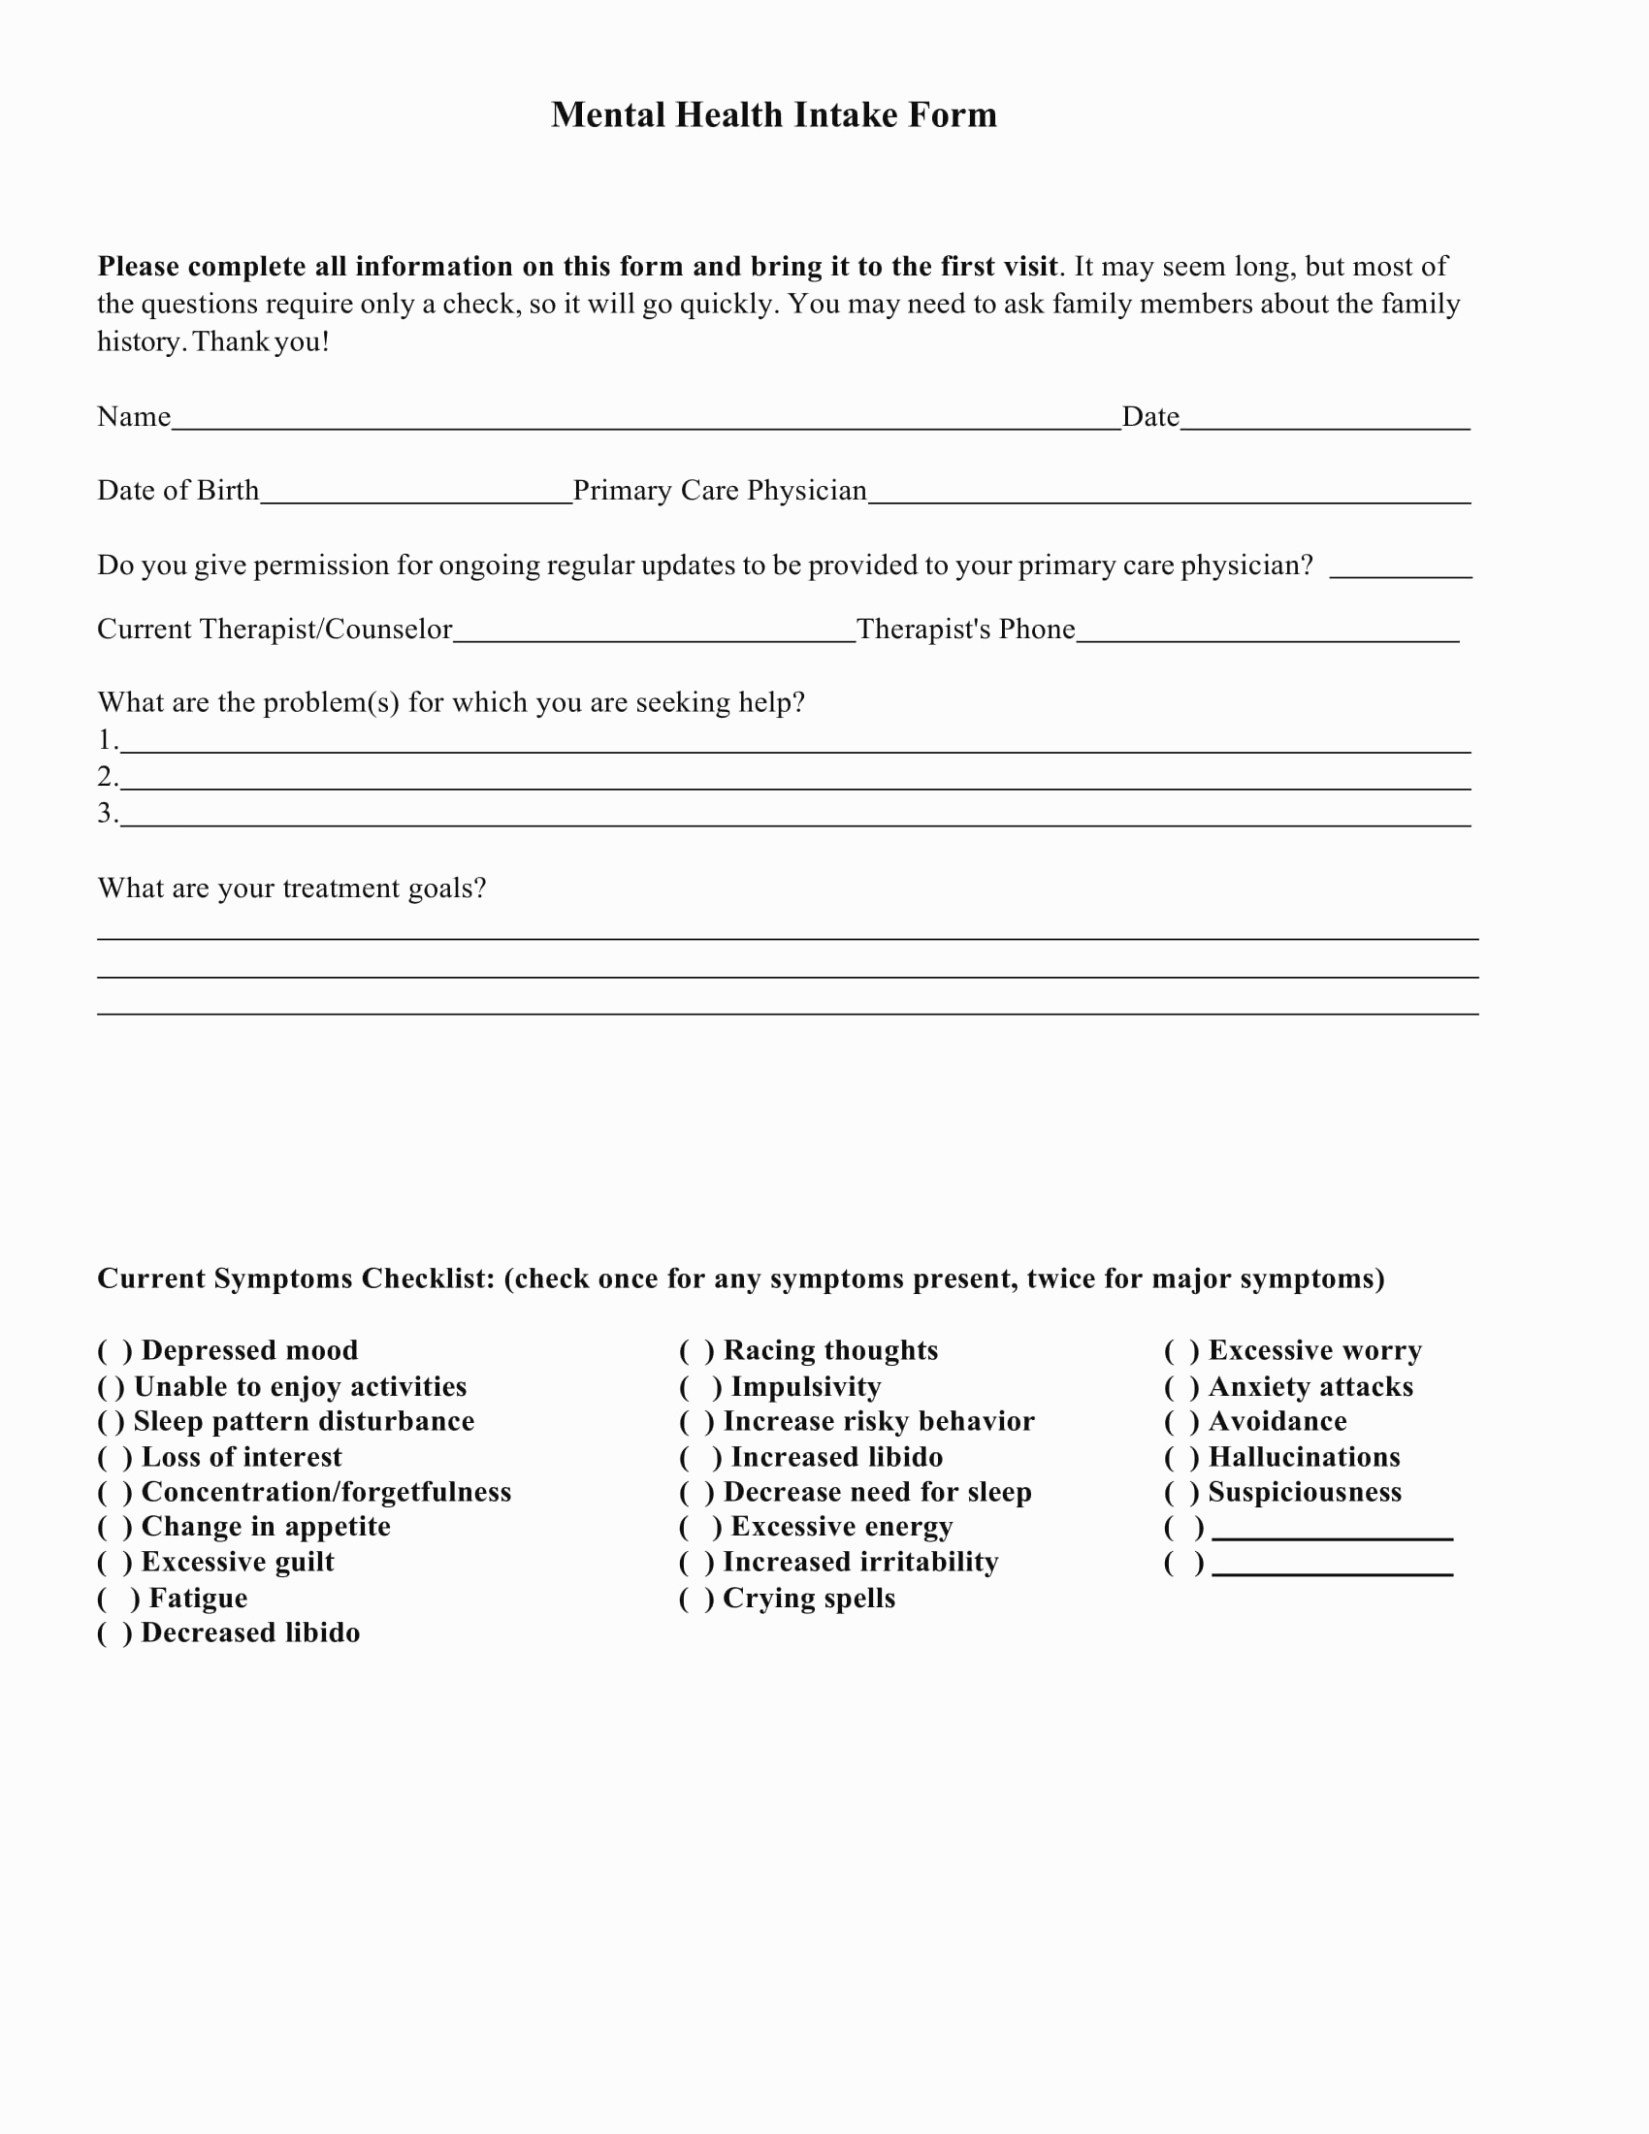 Mental Health Intake form Template Inspirational Eliminate Your Fears and Doubts About